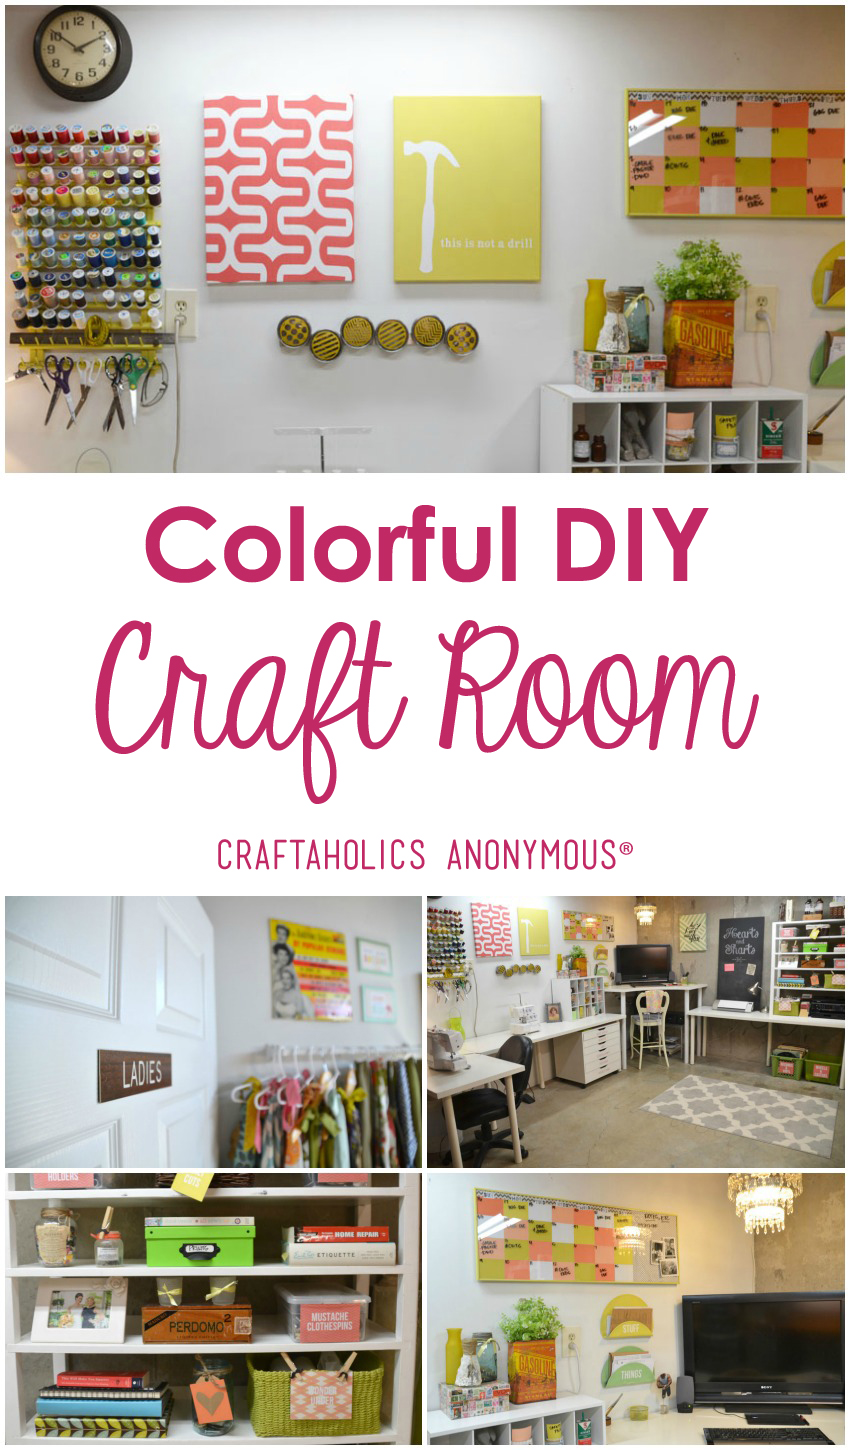 Craft Room Tour / Check out this colorful and fun craft room that Dena of Hearts and Sharts DIY'd completely from scratch!